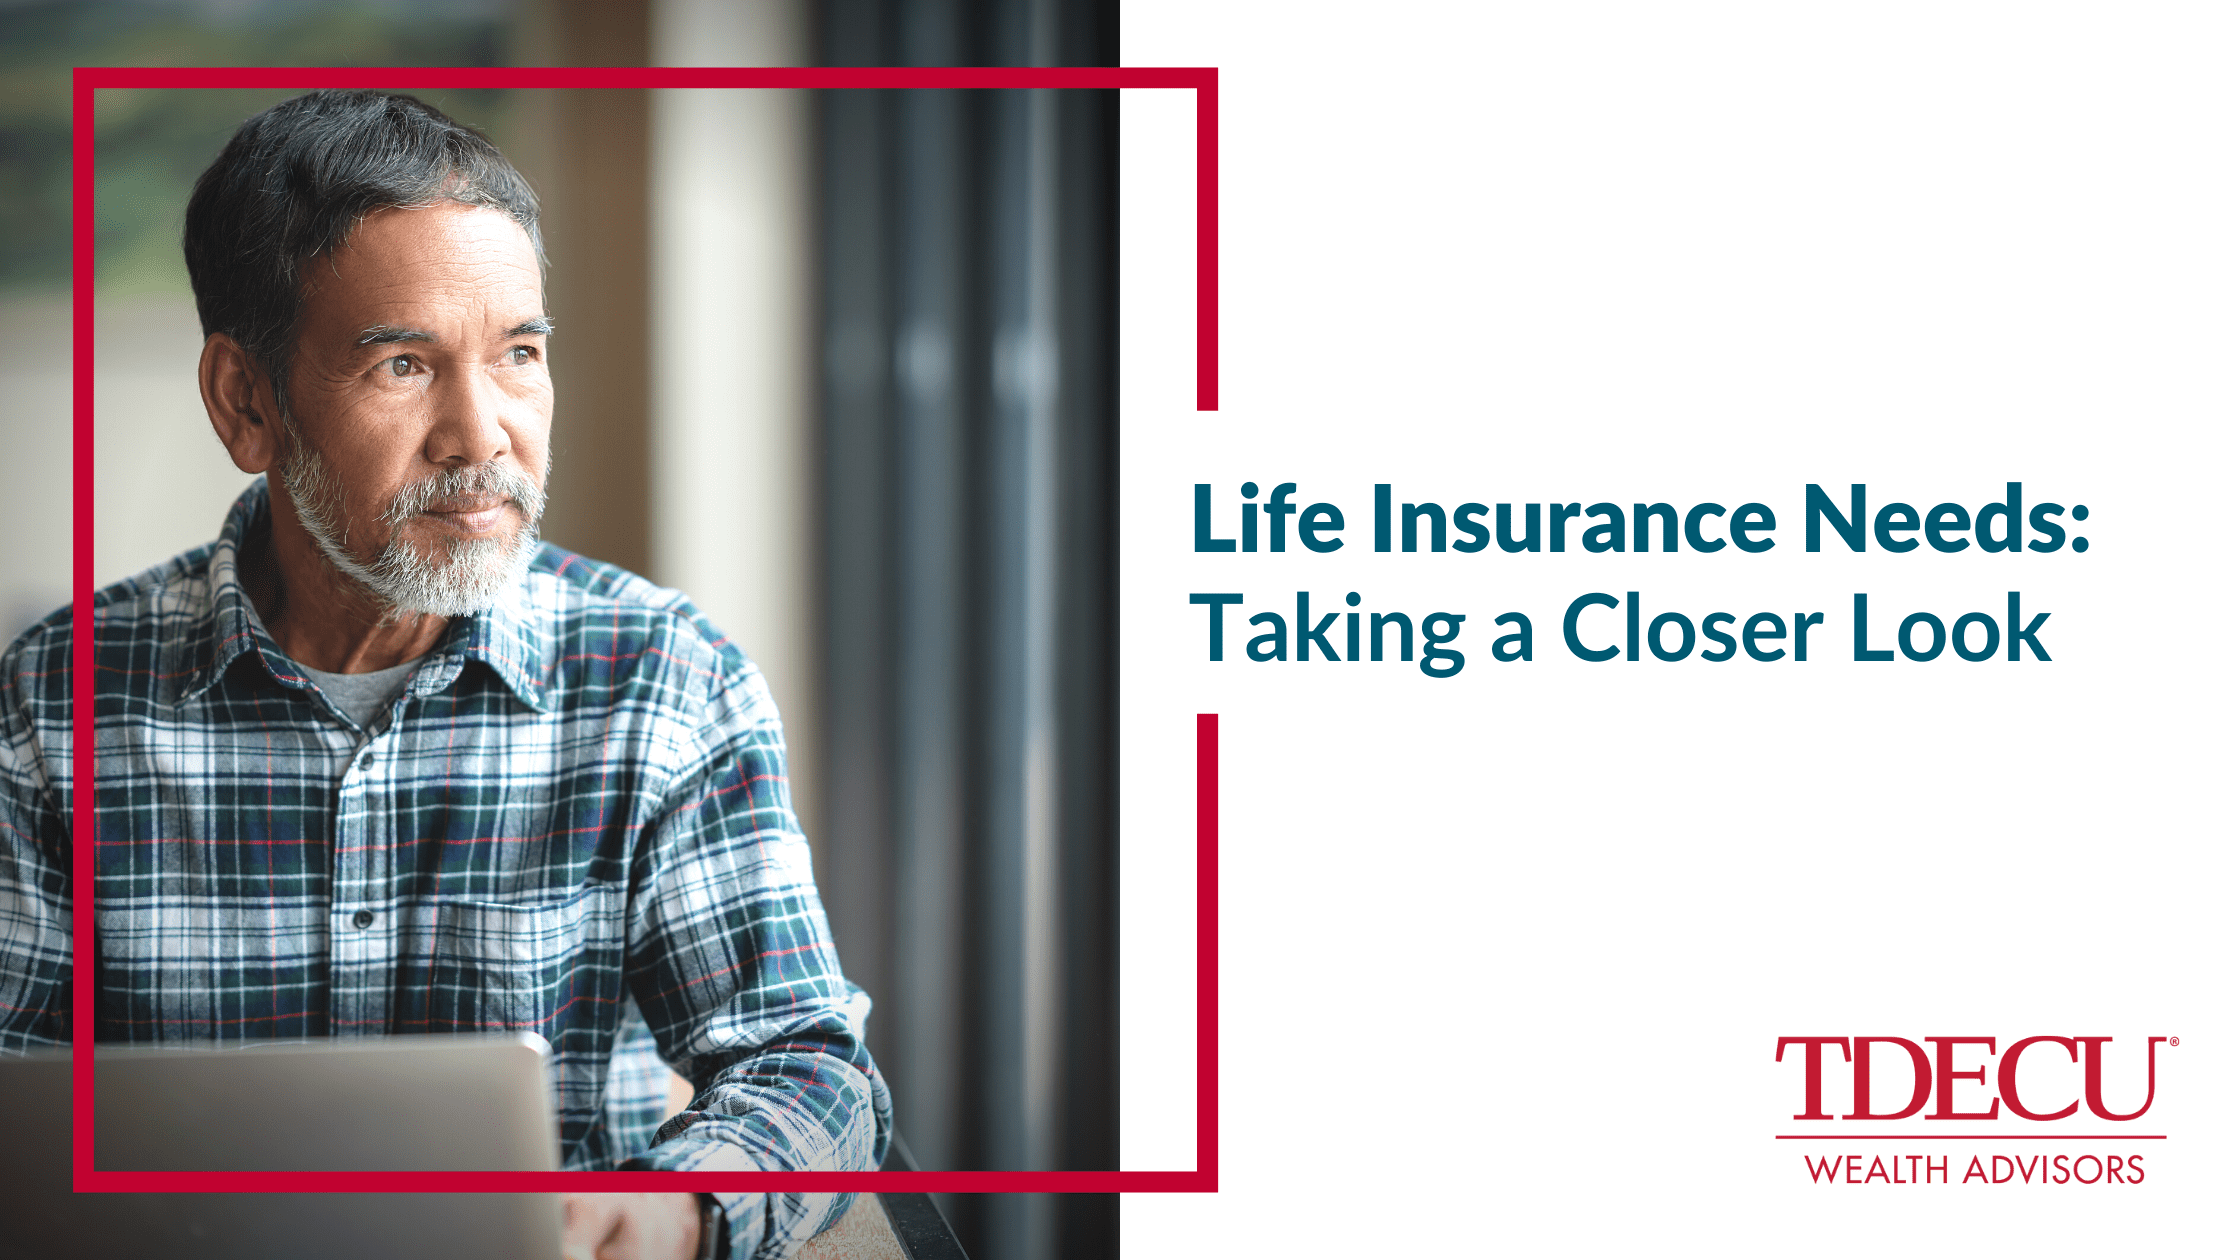 Life Insurance Needs: Taking a Closer Look